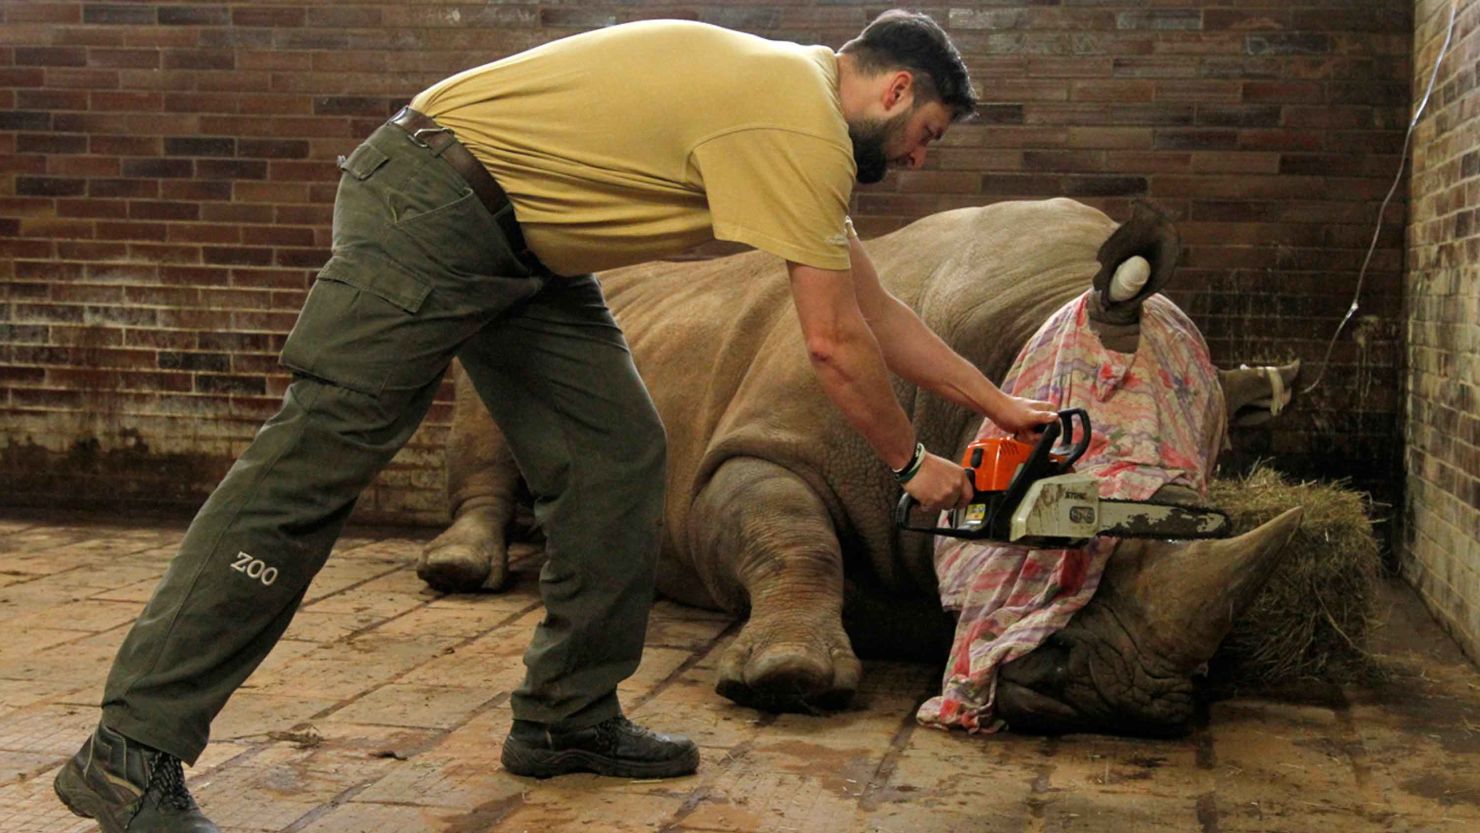 Pamir had his horn removed. The surgery carries some risk but does not hurt, zoo officials said.